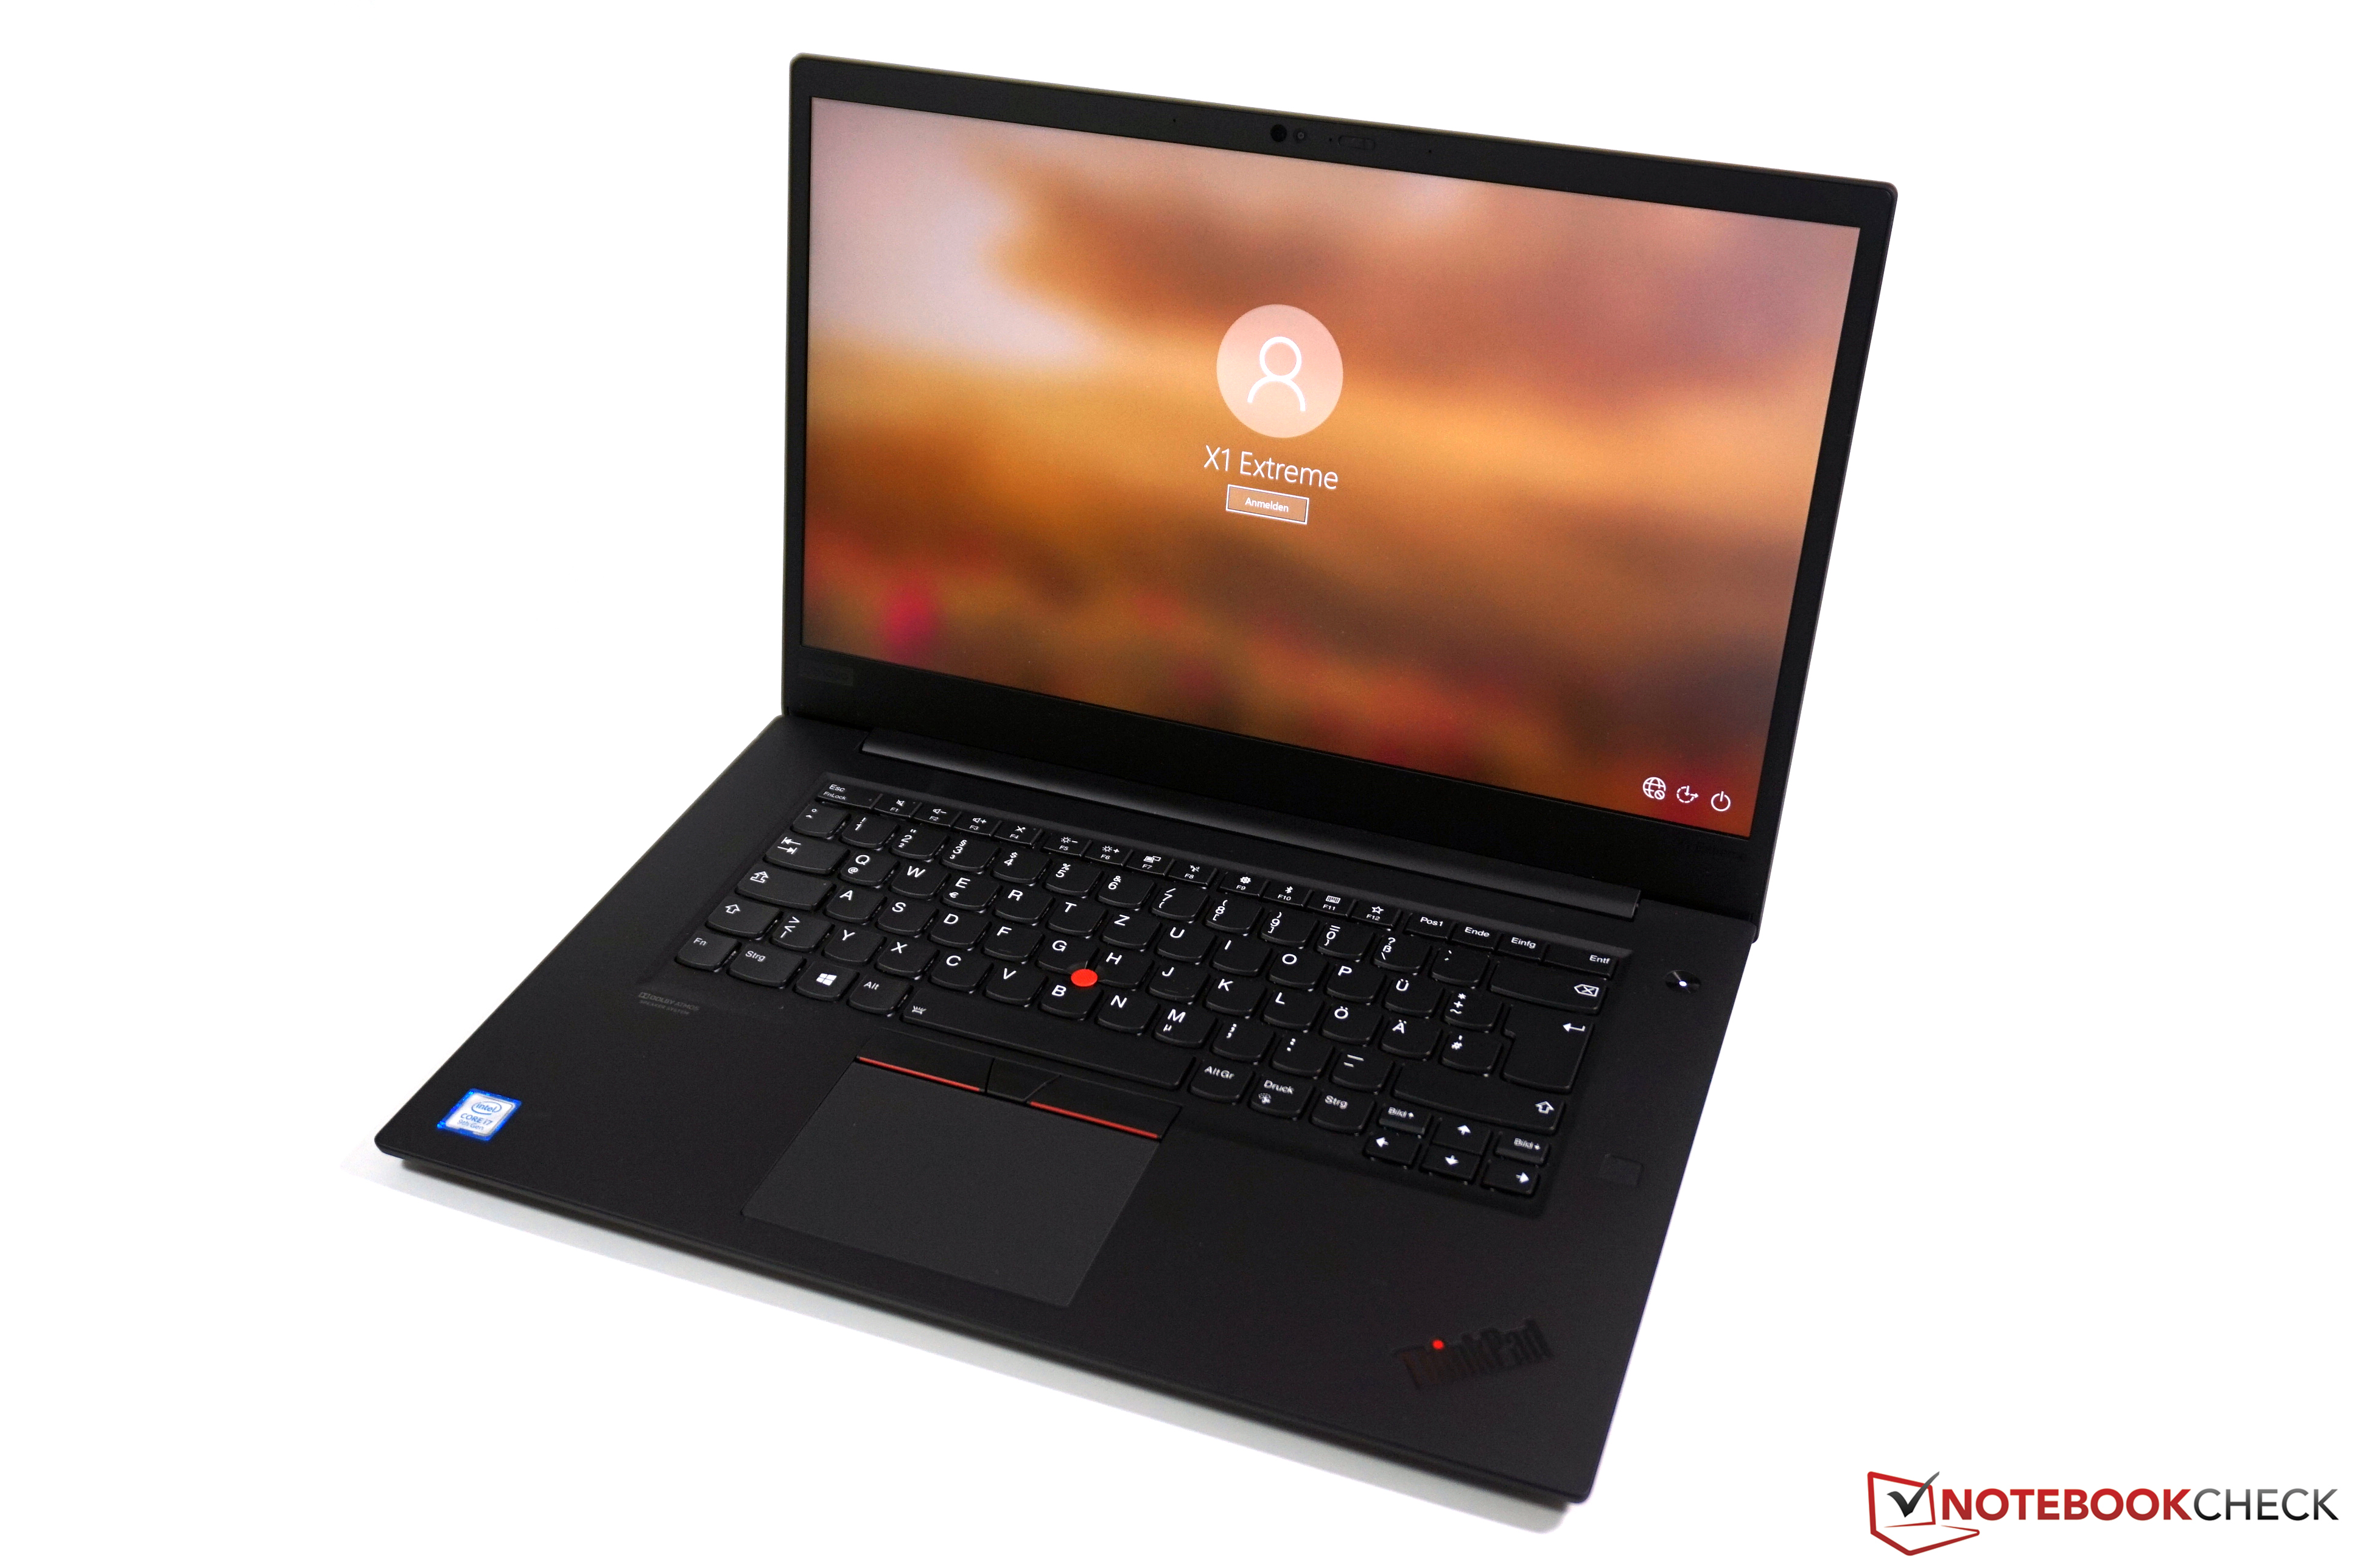 Lenovo ThinkPad X1 Extreme 2019 Laptop Review: The second generation of Lenovo's premier multimedia laptop has gotten worse - Reviews